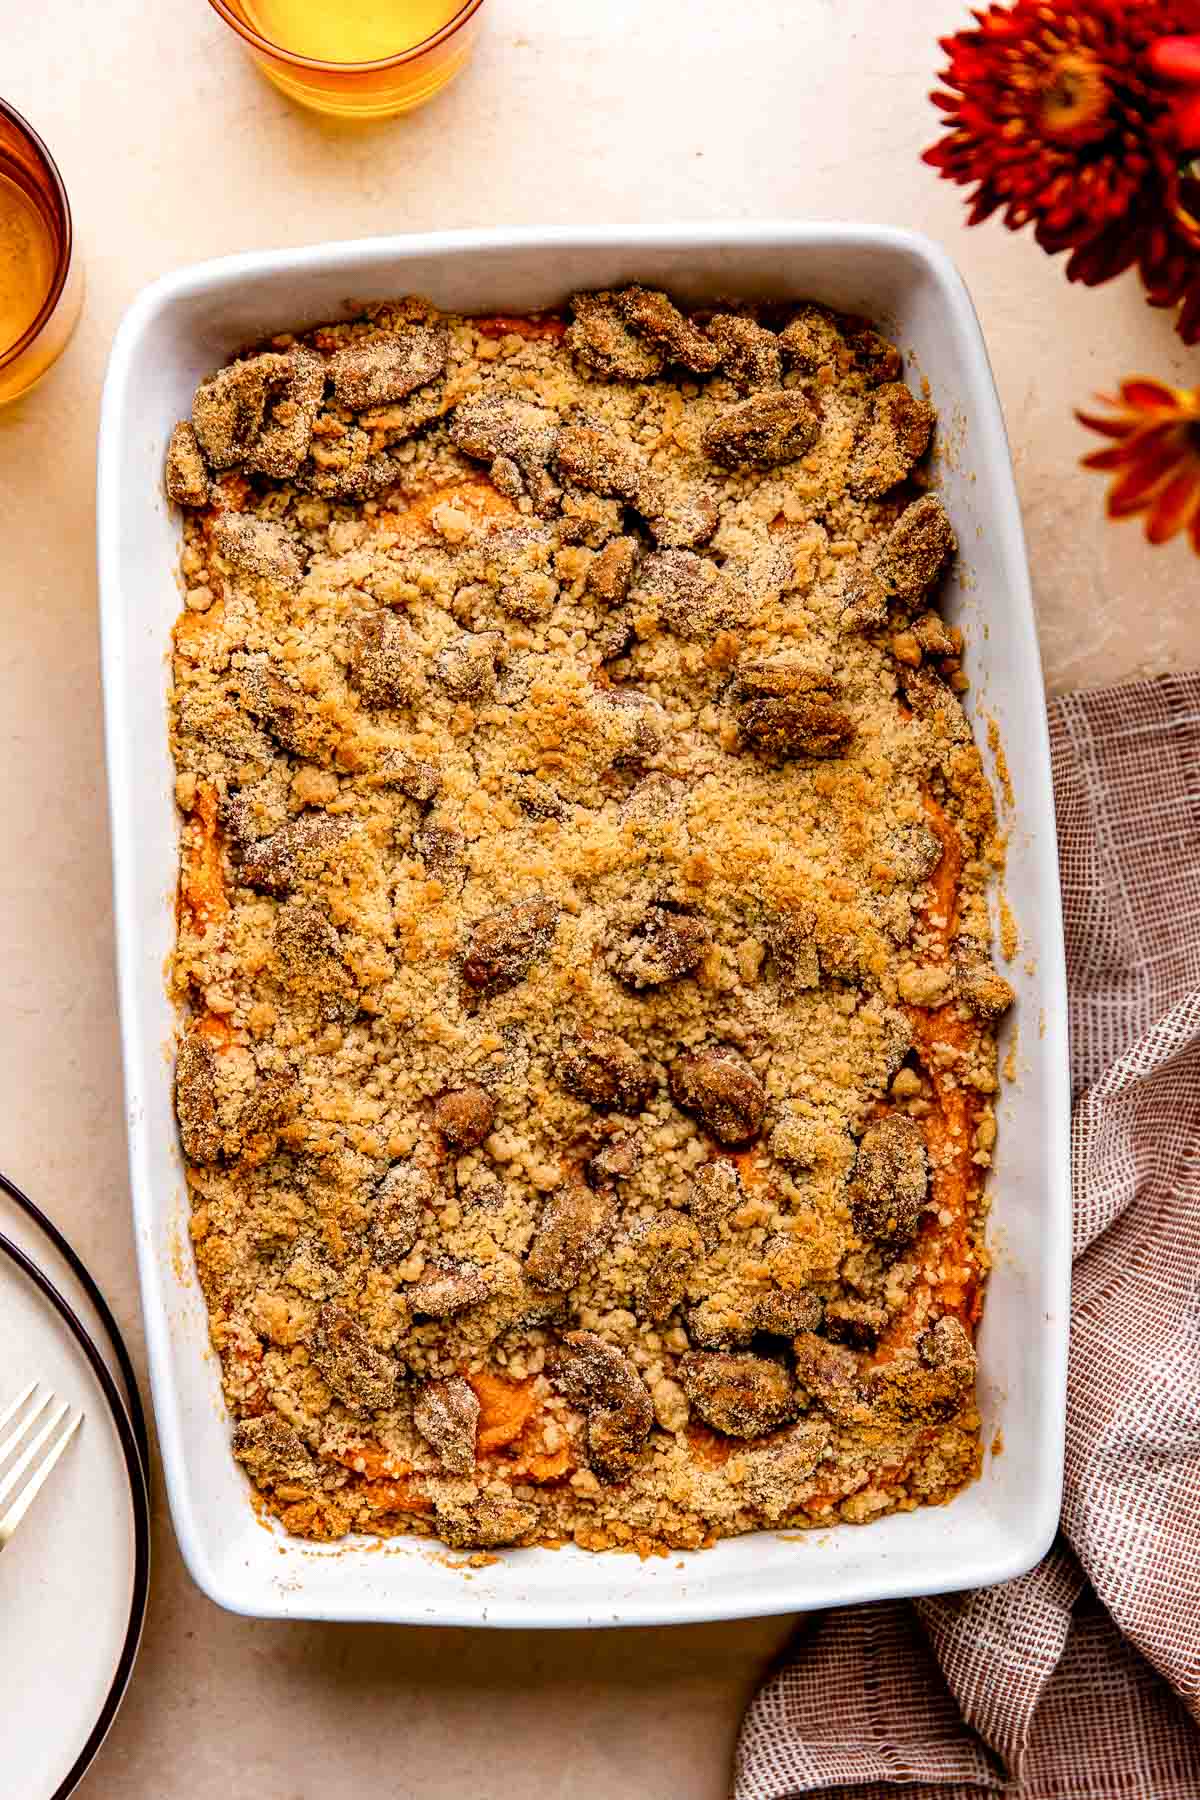 Why You Should Always Let A Casserole Sit After Baking